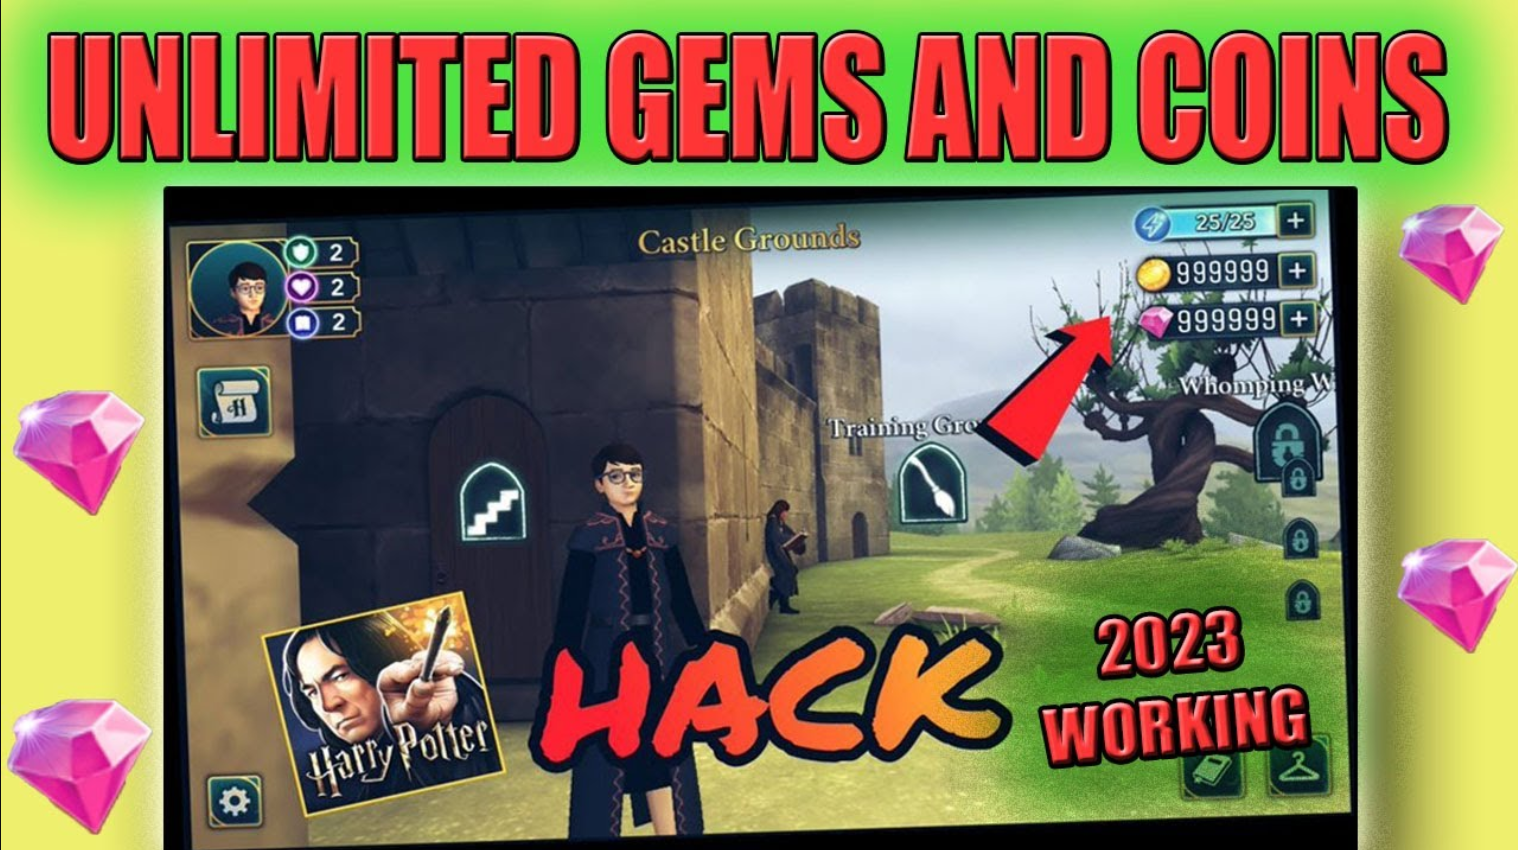 Harry Potter Hack Unlimited Gems and Unlimited Coins